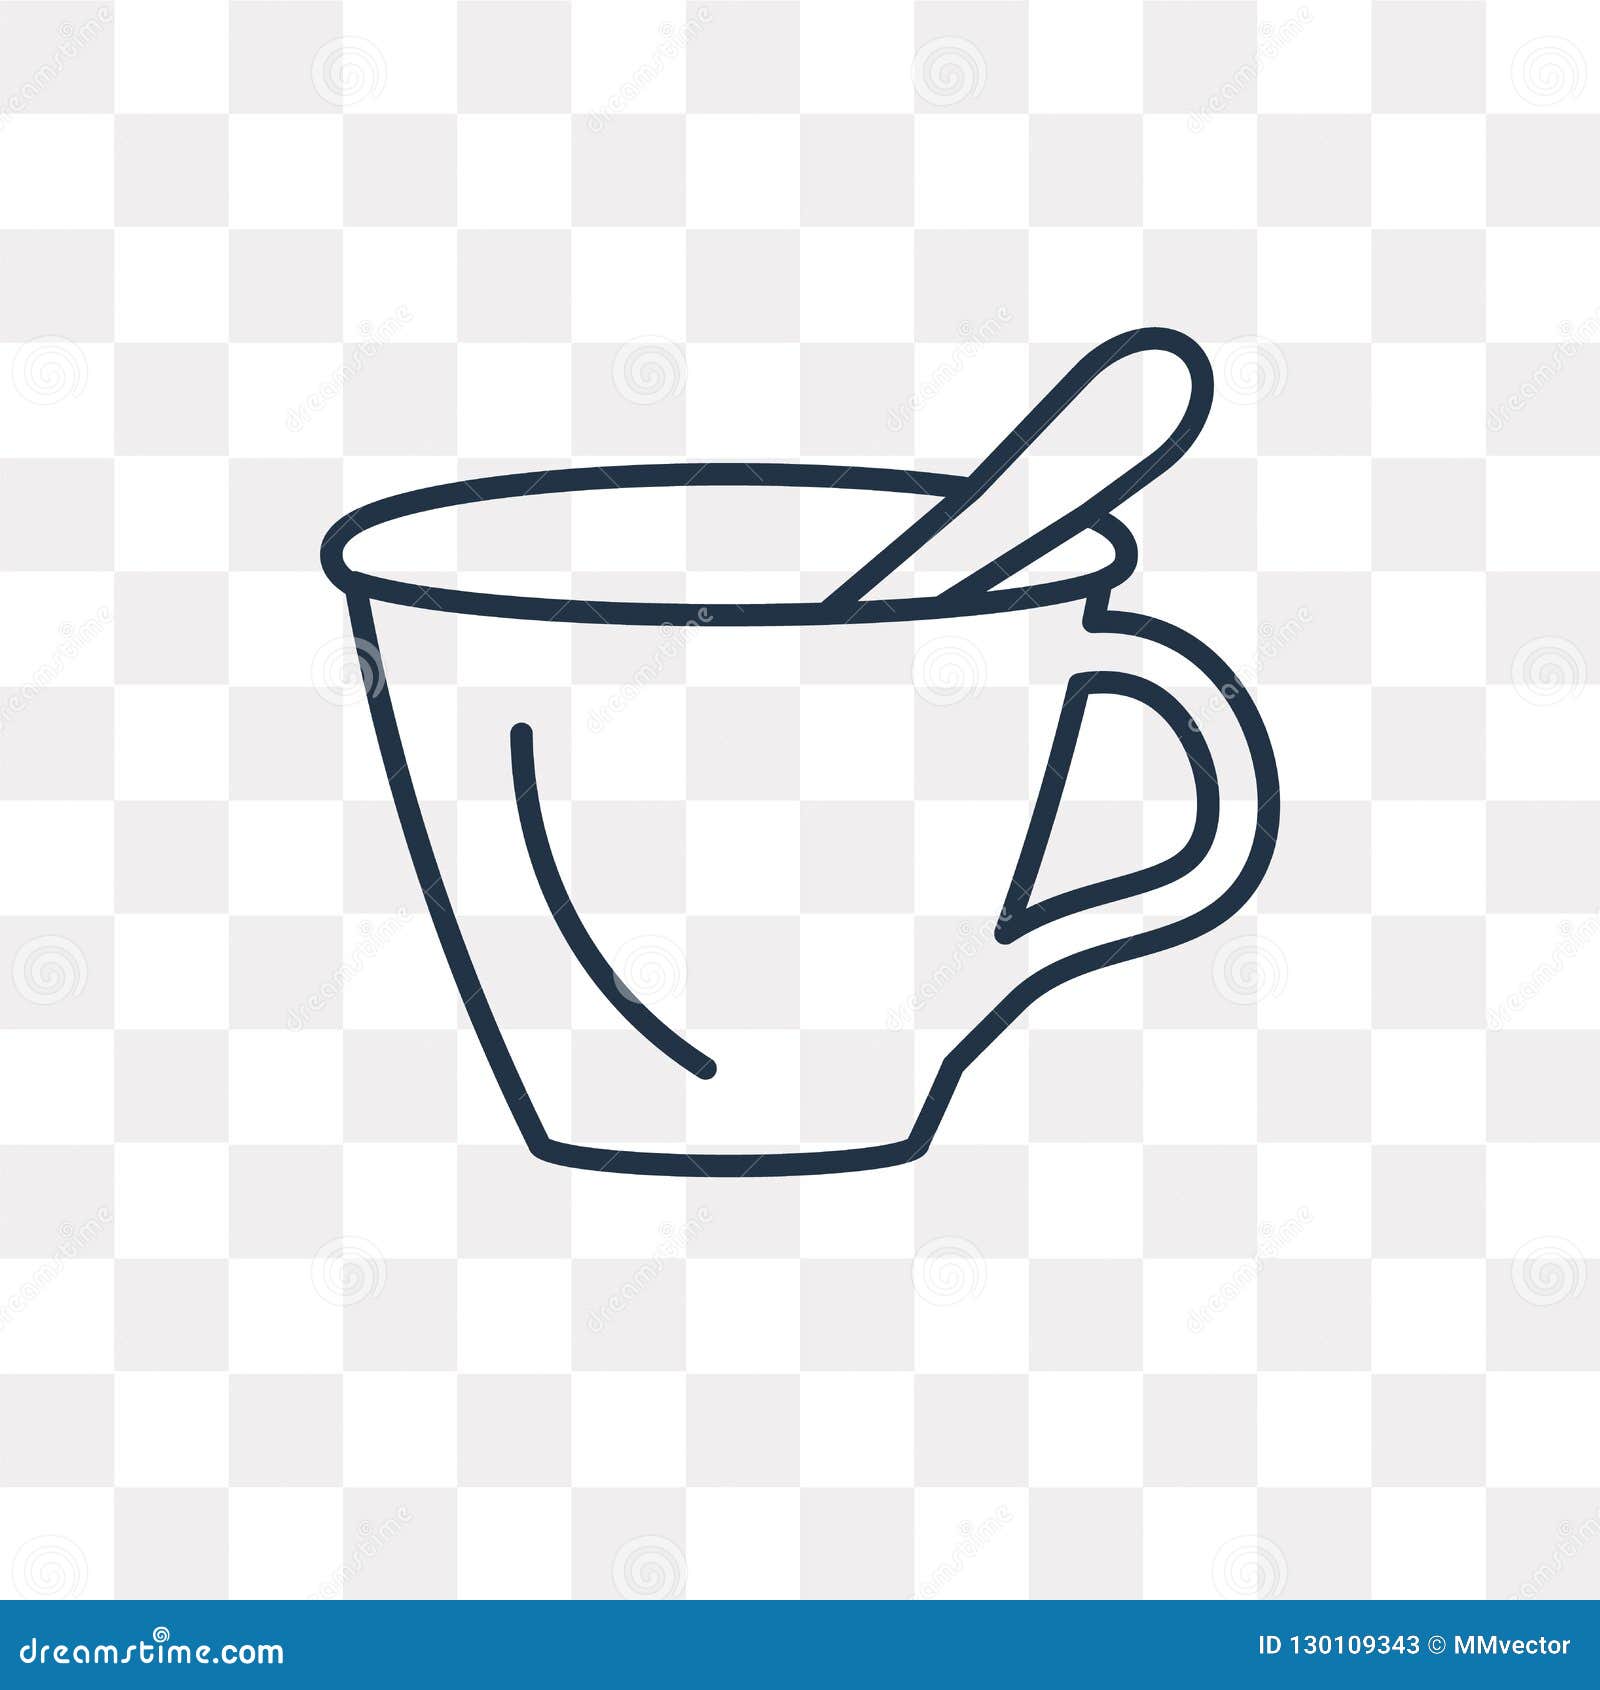 https://thumbs.dreamstime.com/z/breakfast-cup-vector-icon-isolated-transparent-background-li-outline-high-quality-linear-transparency-concept-can-be-used-web-130109343.jpg